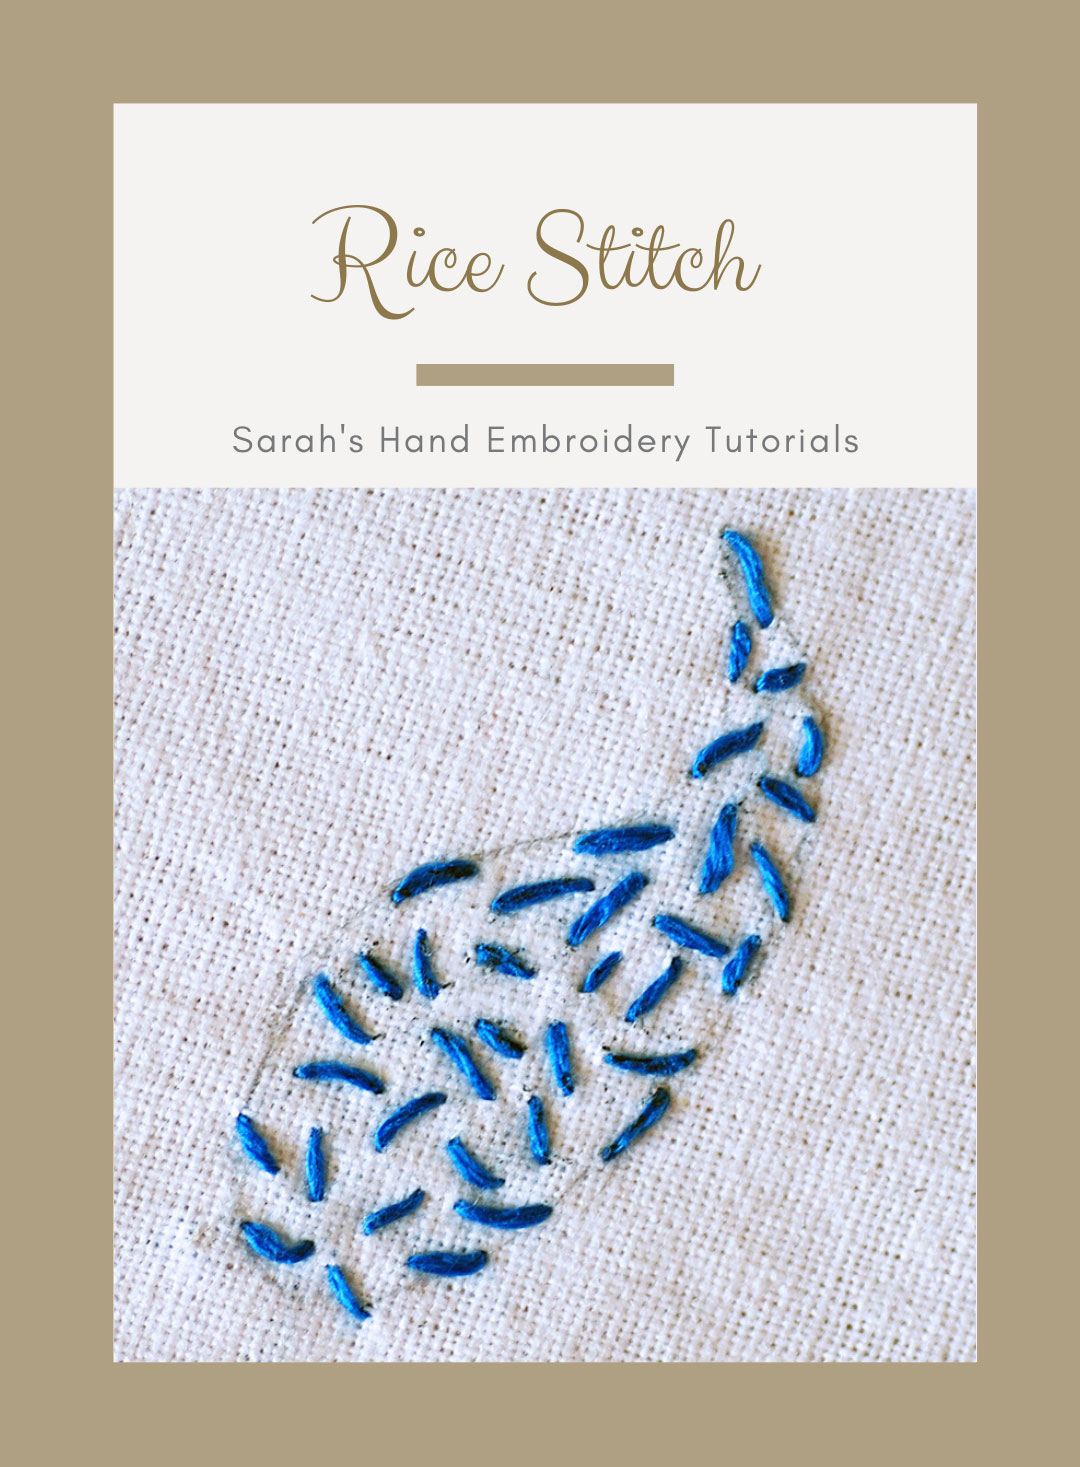 Embroider a half stitch kit - Hand embroidery tutorial 